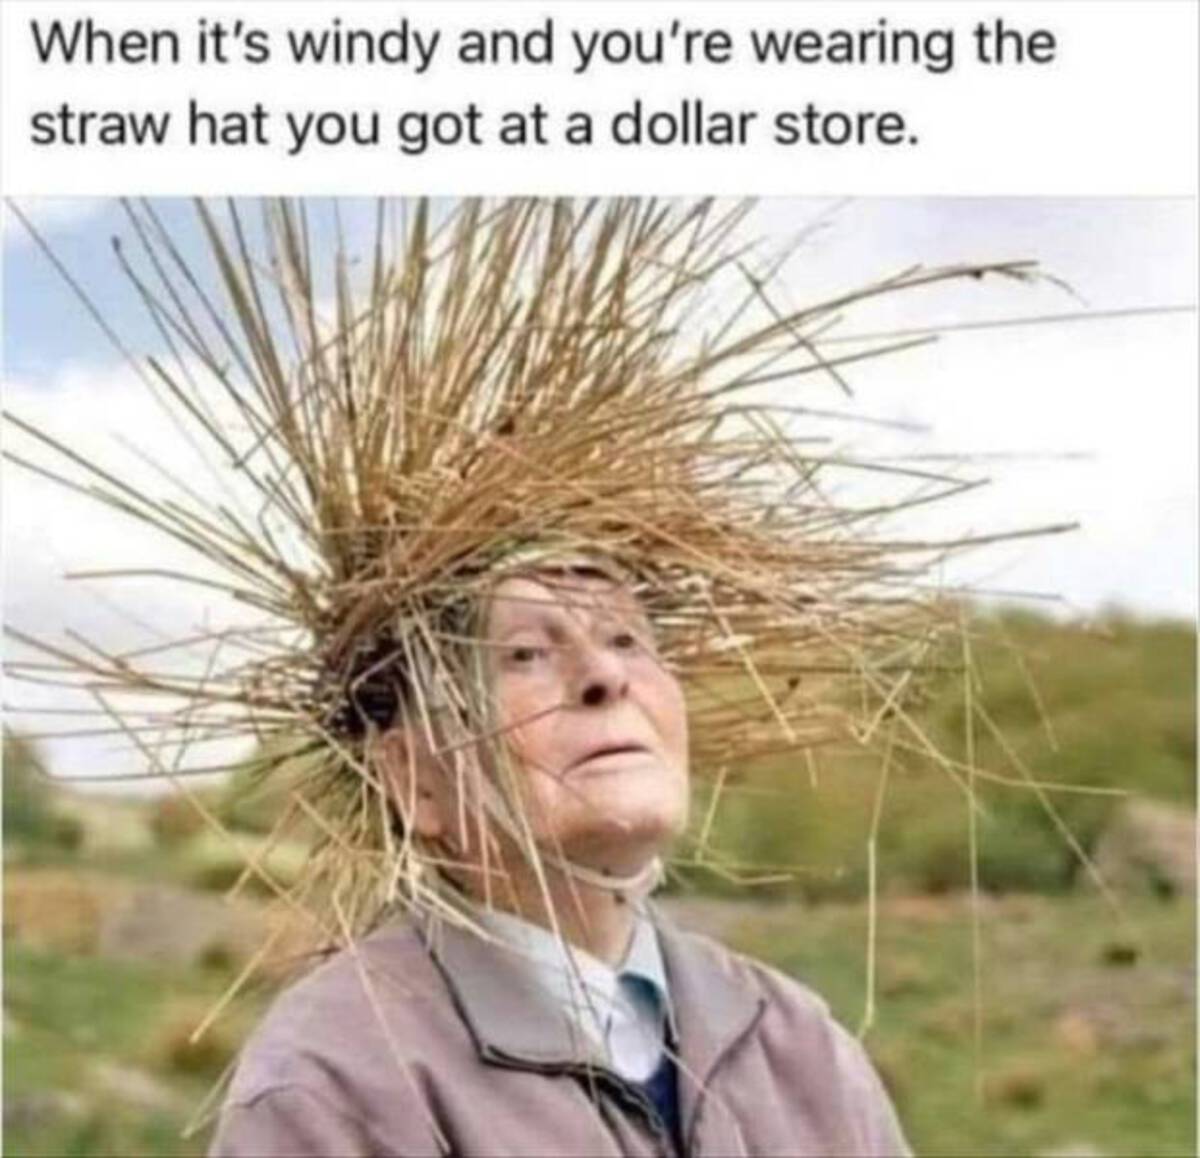 When it's windy and you're wearing the straw hat you got at a dollar store.